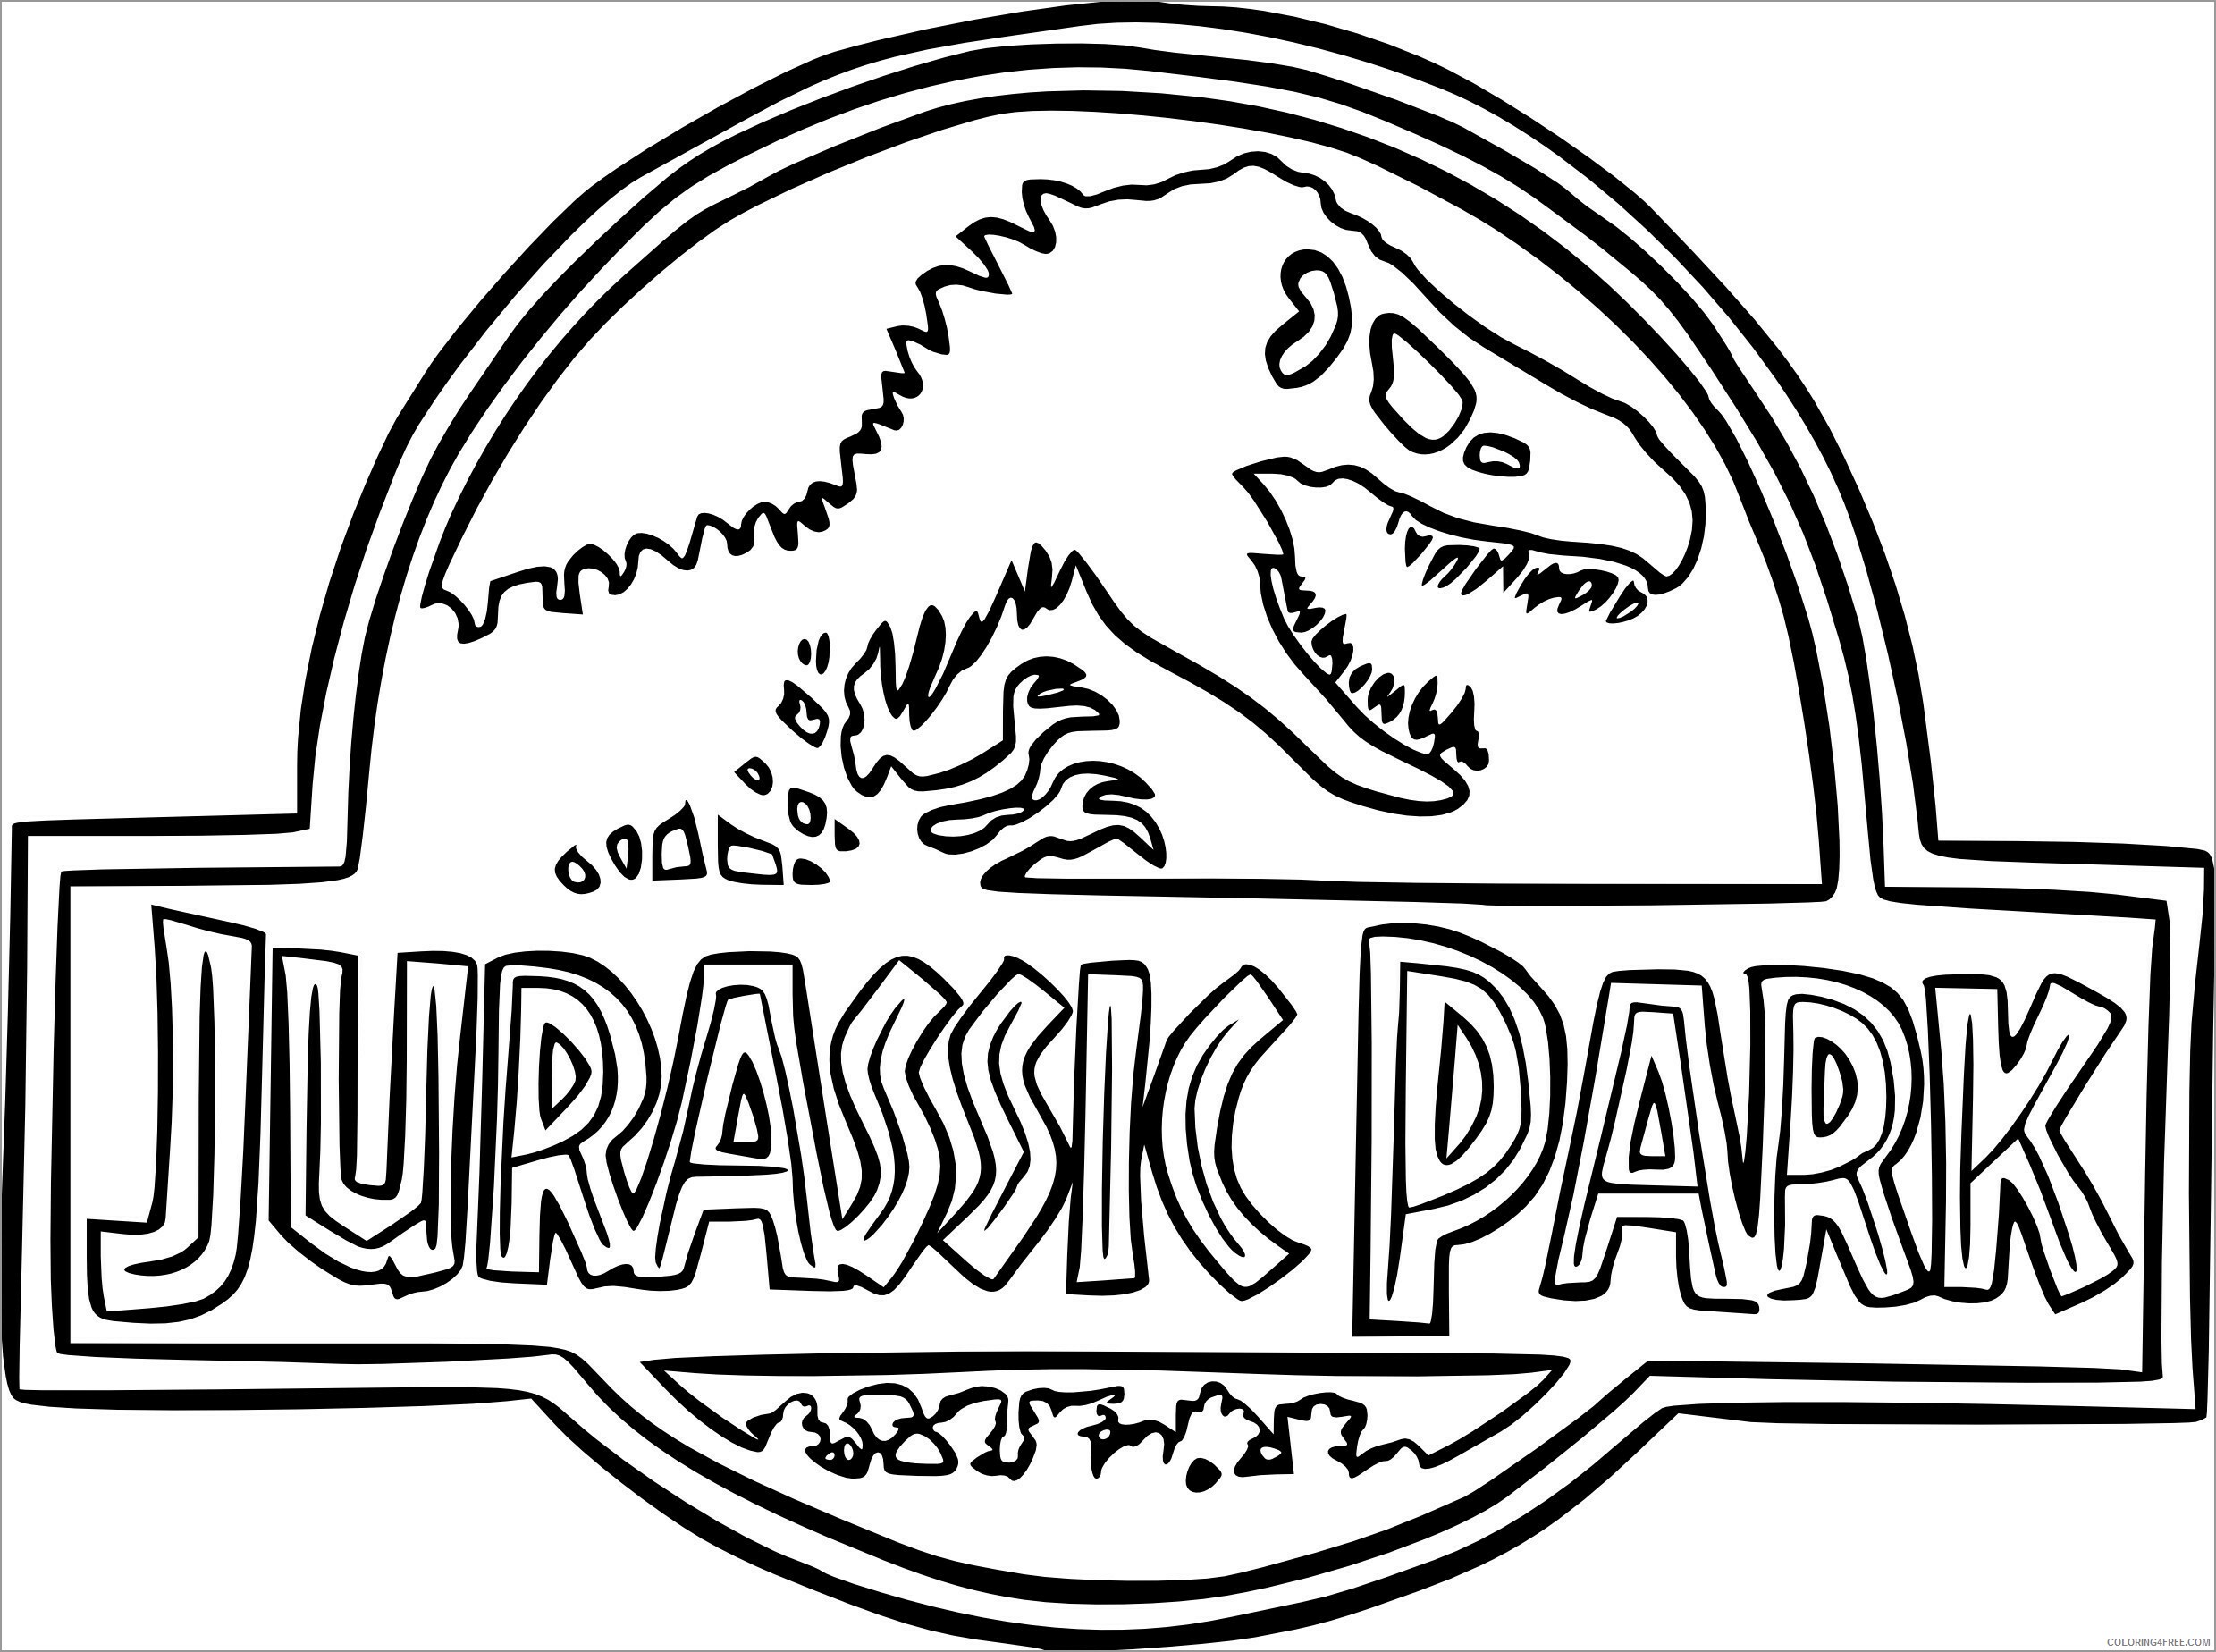 Jurassic World Coloring Pages for boys jurassic park logo Printable 2020 0513 Coloring4free